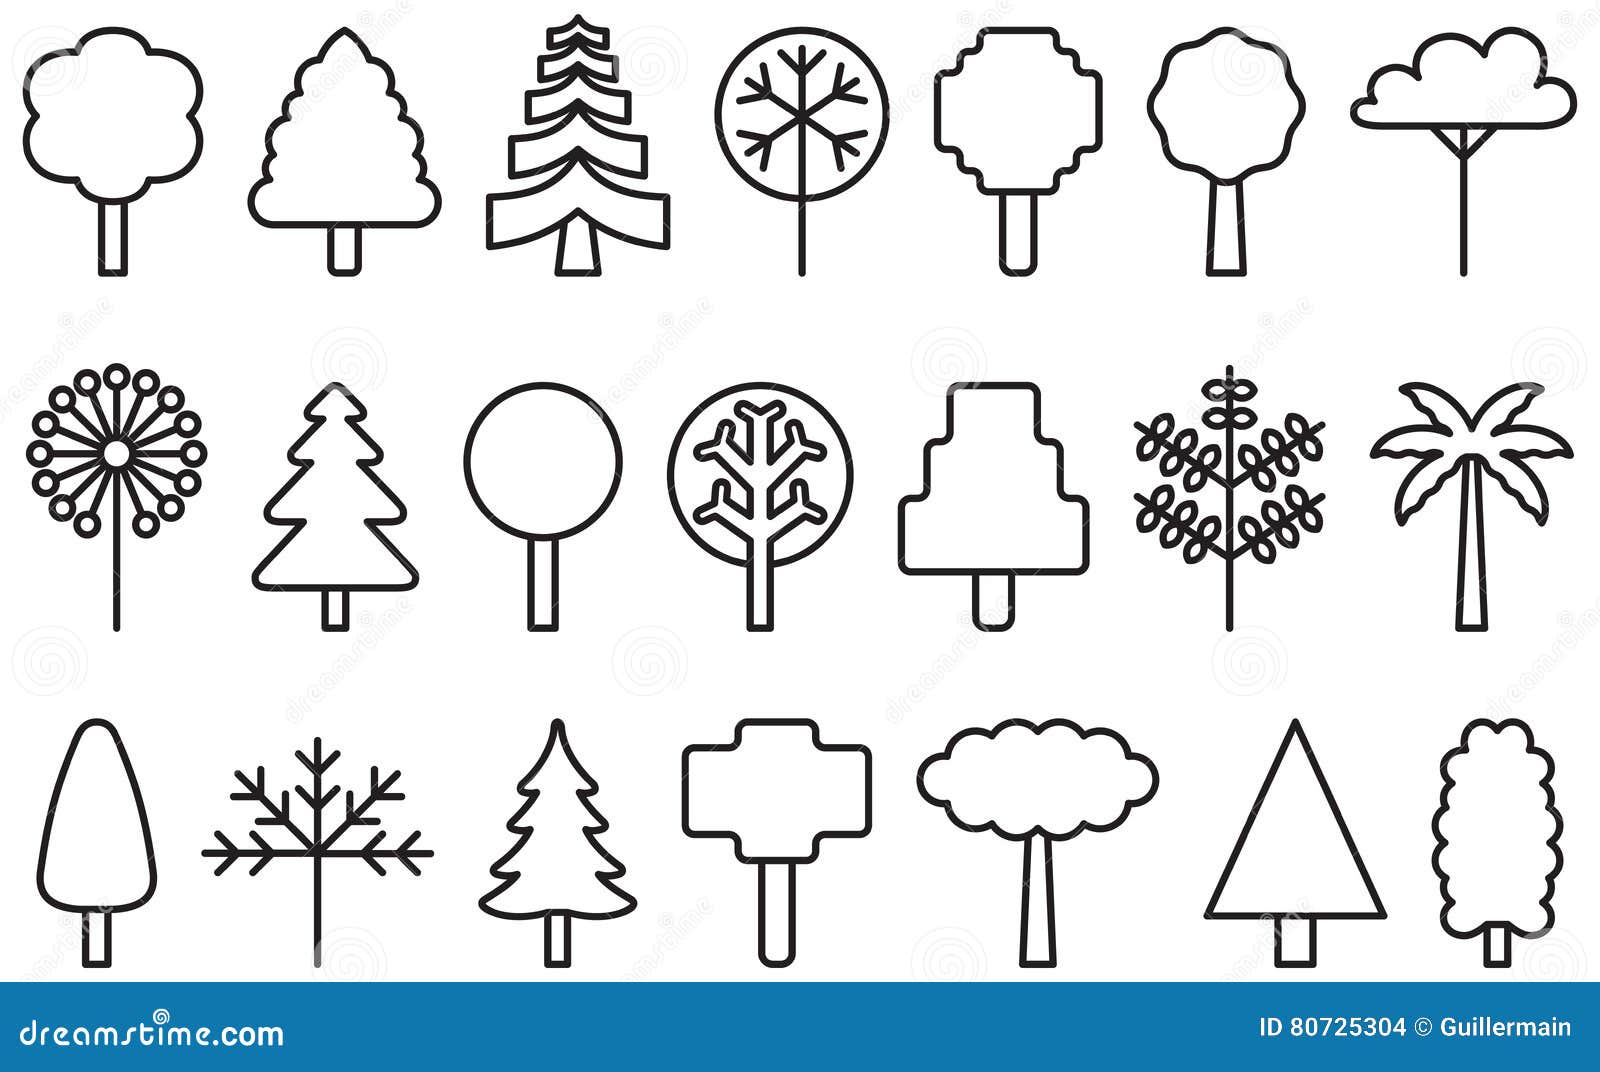 Set of outlined tree icons stock vector. Illustration of icons - 80725304